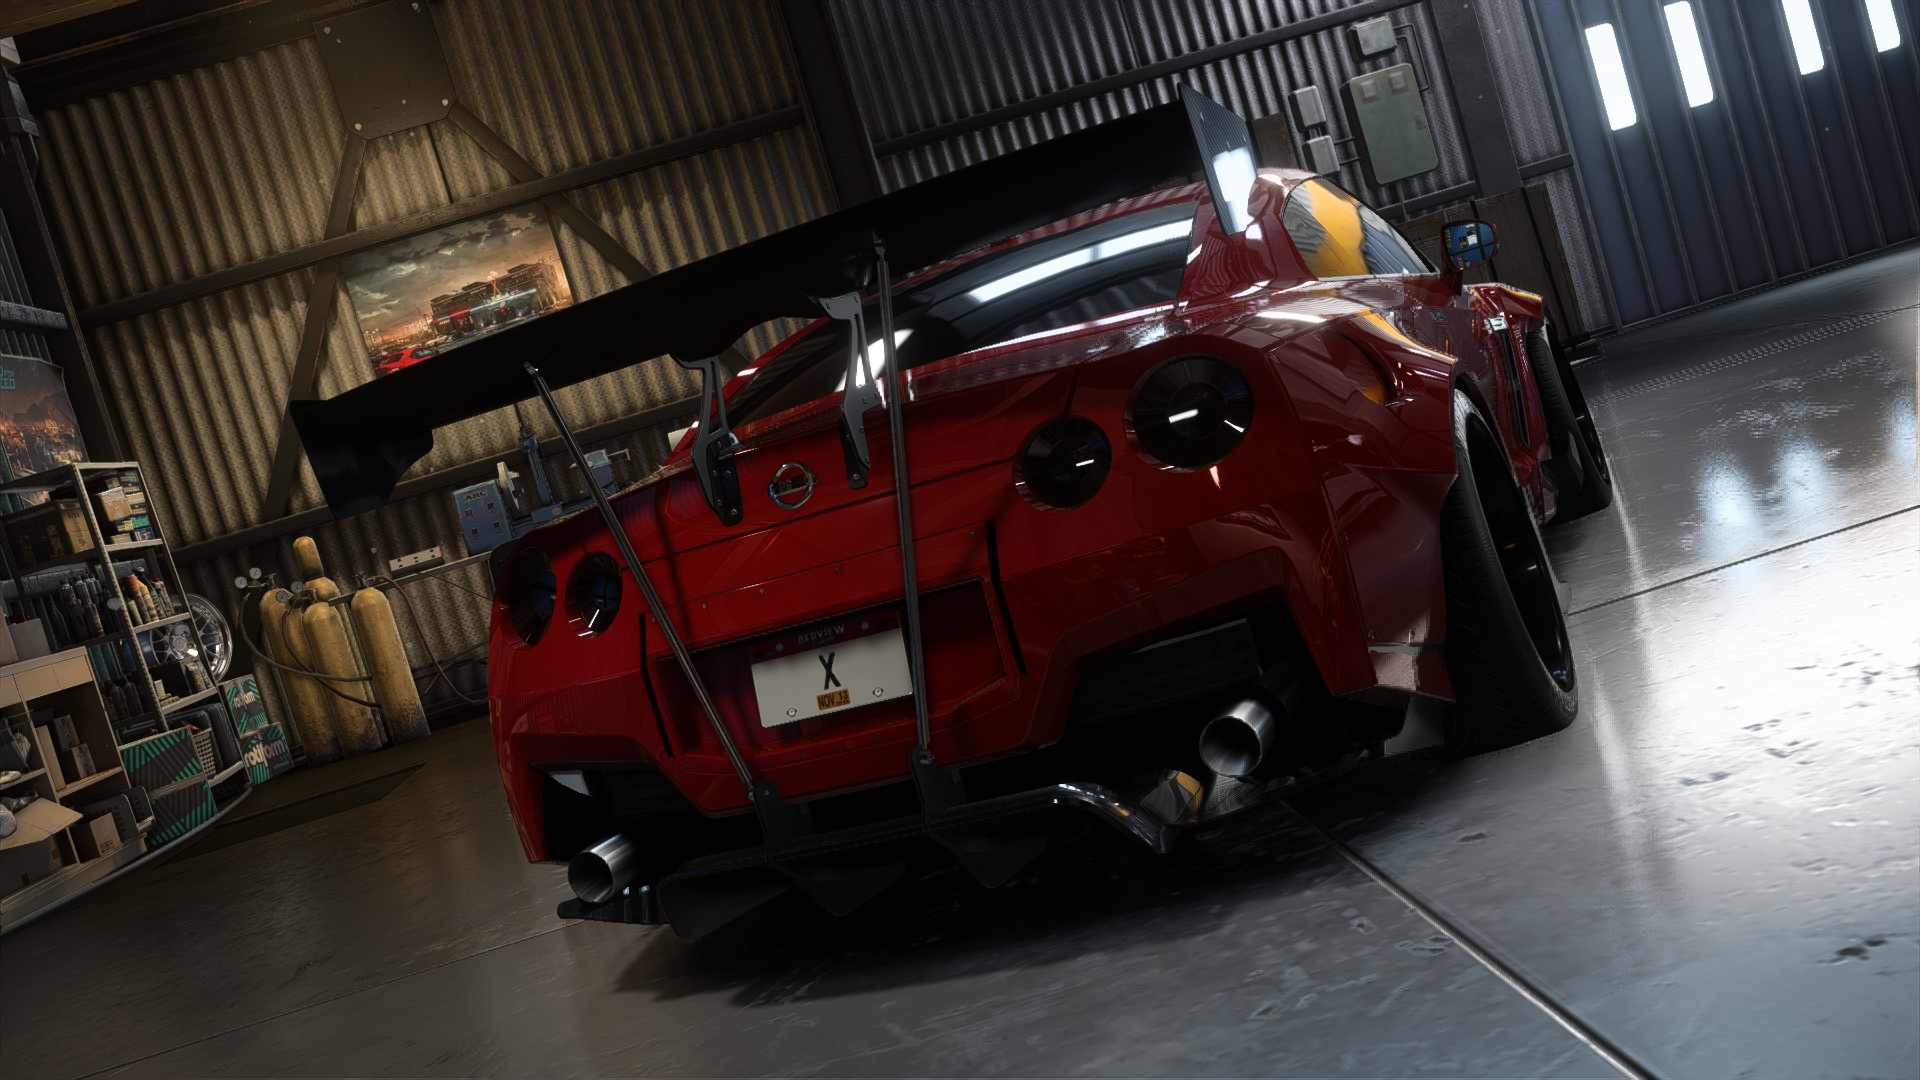 General 1920x1080 Need for Speed Payback red Nissan GT-R car Need for Speed Nissan Japanese cars bodykit car spoiler Electronic Arts rear view vehicle interior red cars